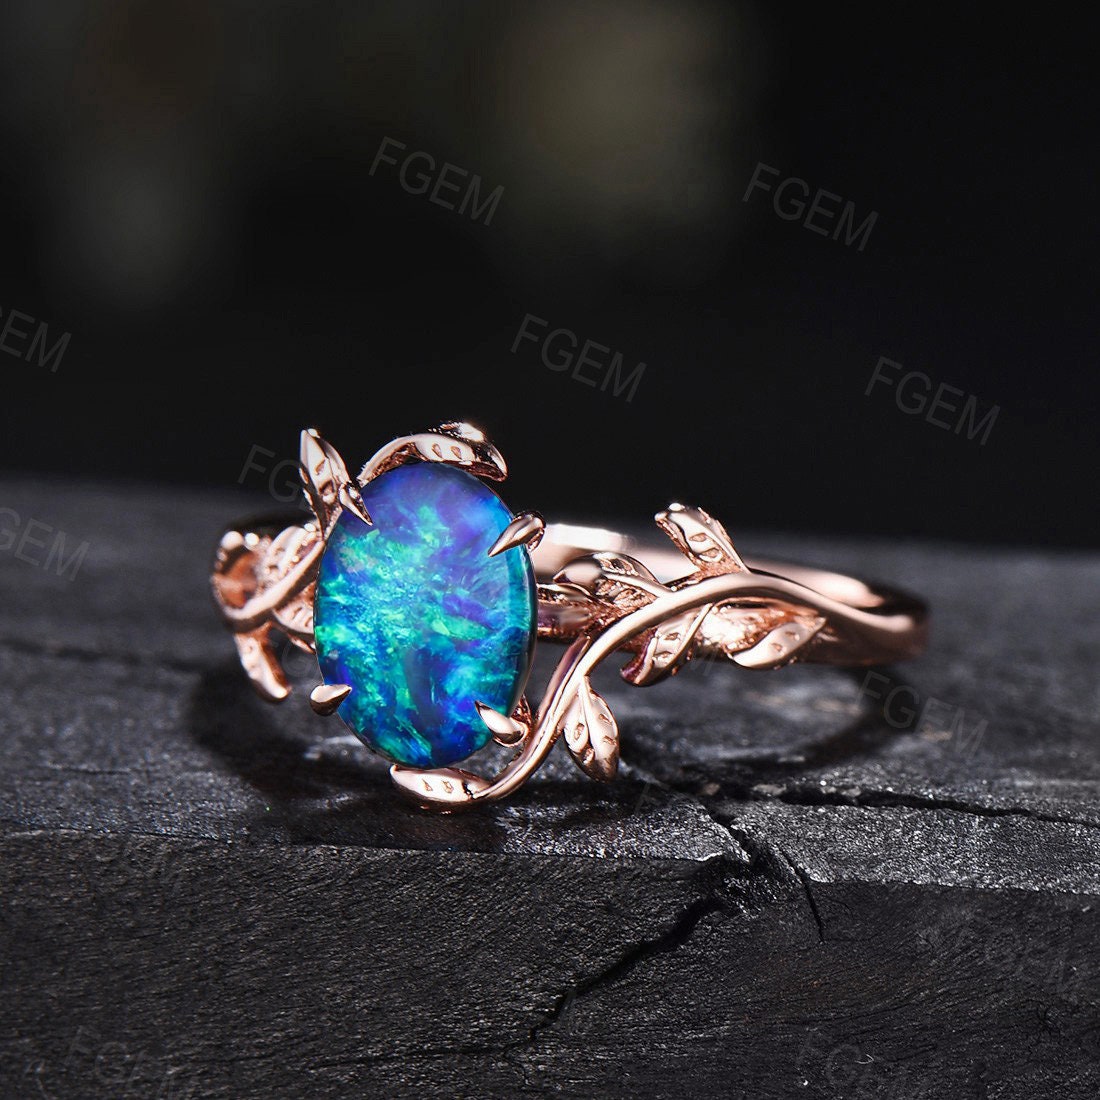 Sterling Silver Fire Cherry Opal Ring